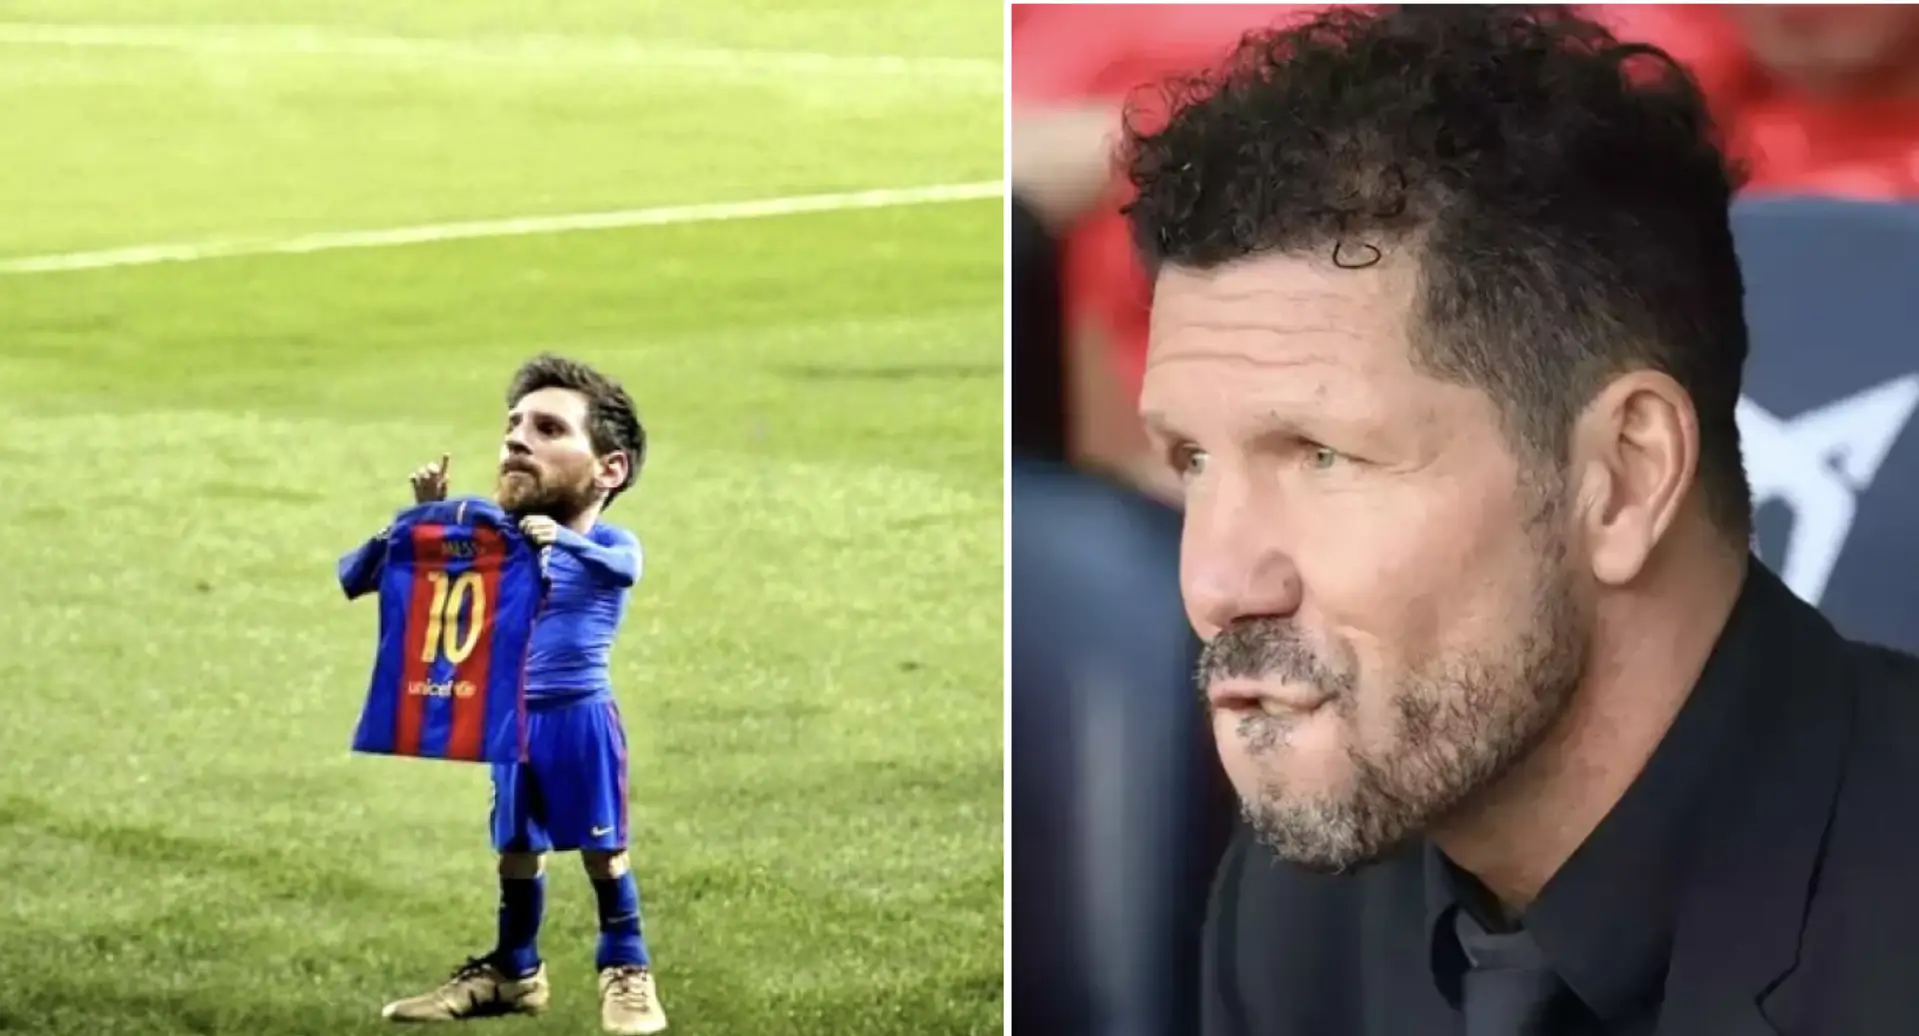 Simeone used to call Messi 'a dwarf' to make him less scary for Atletico players